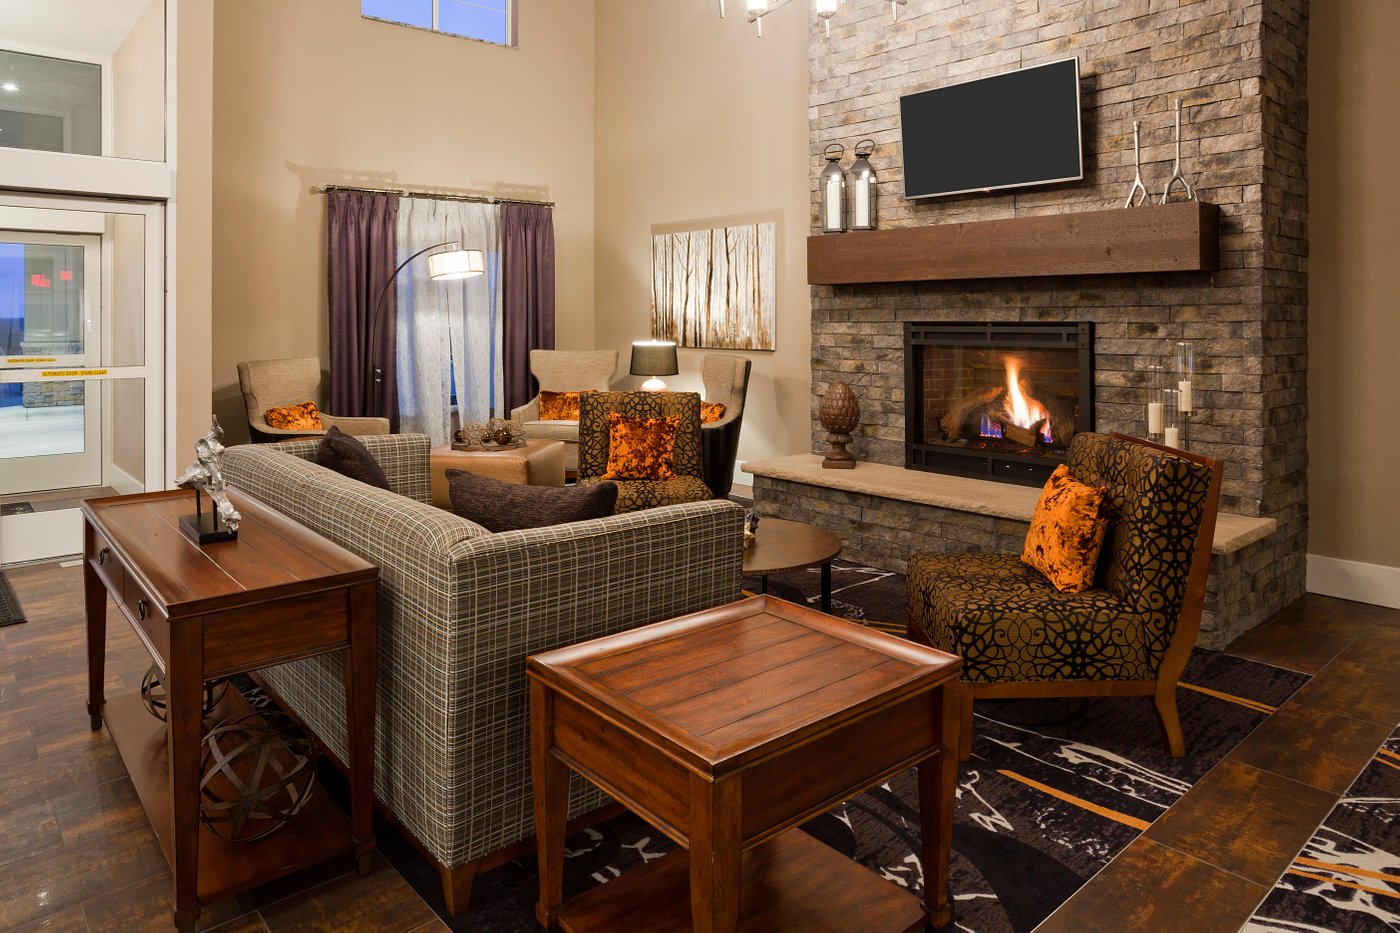 GRANDSTAY HOTEL & SUITES MORRIS - Prices & Reviews (MN)